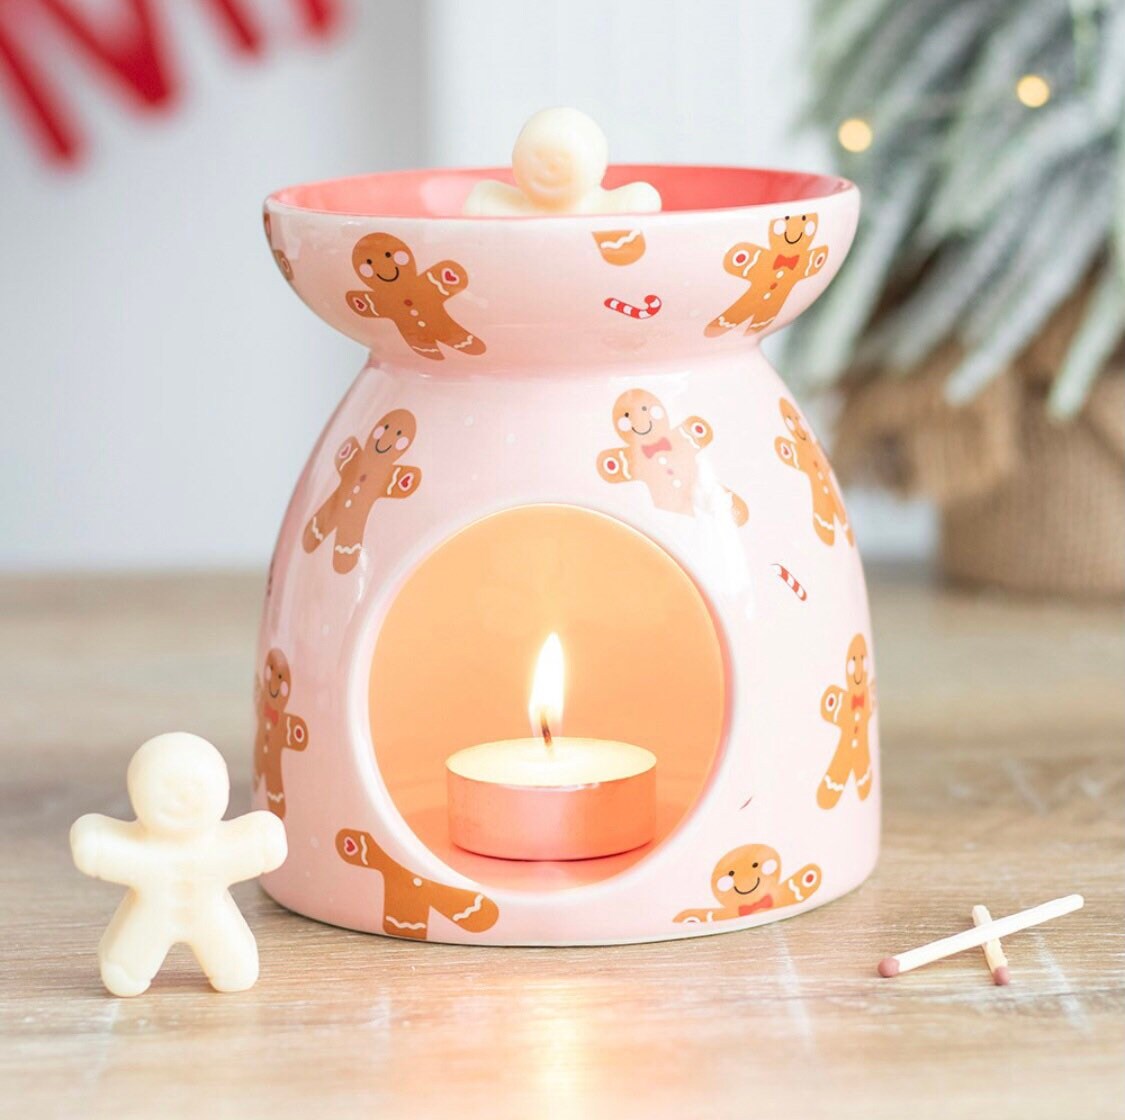 Gift Set - Gingerbread Wax Melter with Wax Melts and Tea Lights